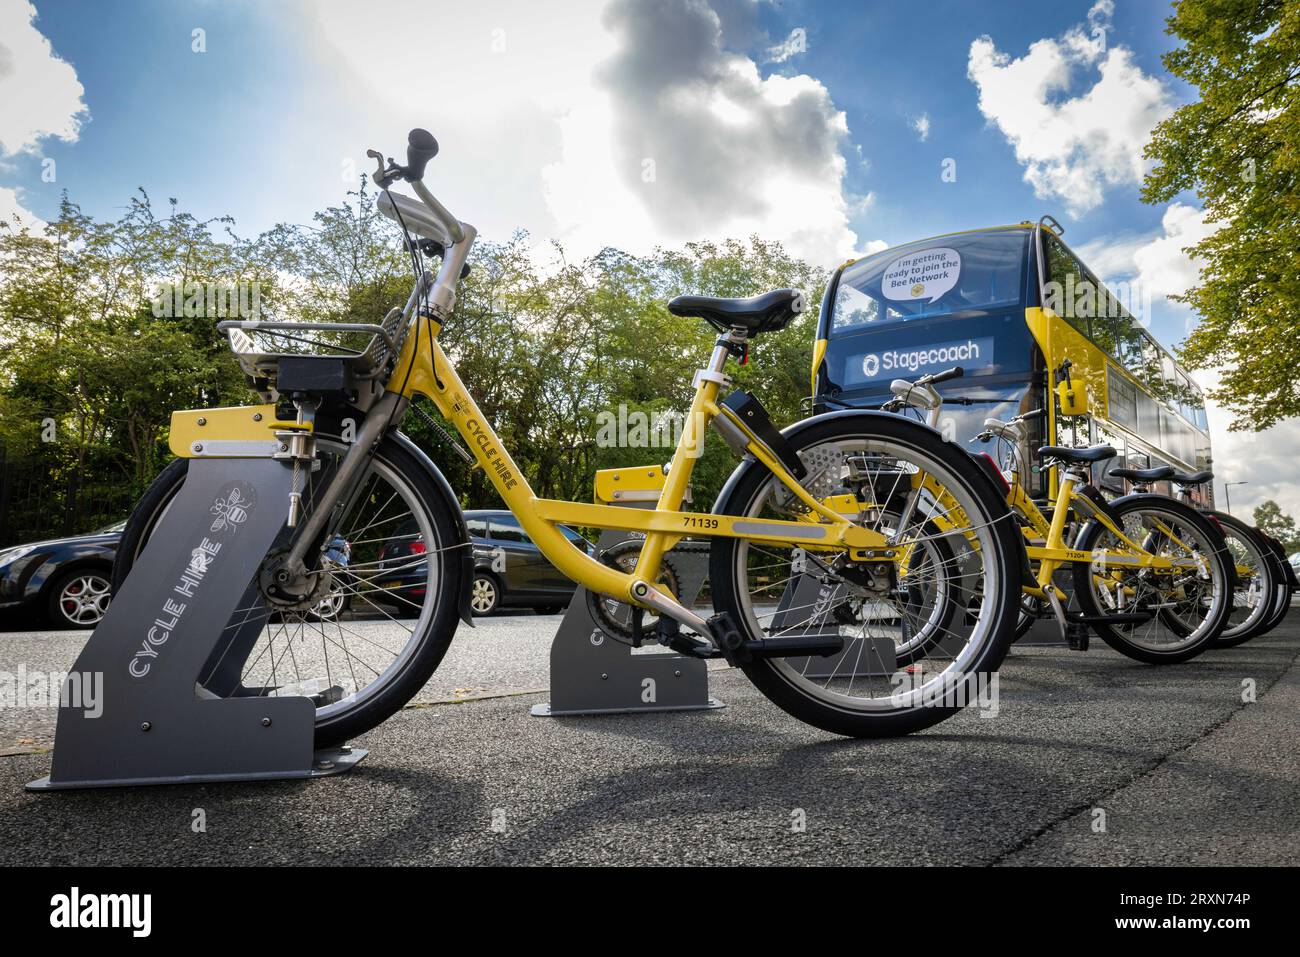 Greater Manchester’s first publicly operated, self service, 24/7 bike hire scheme is running in parts of Manchester, Trafford and Salford. Stock Photo